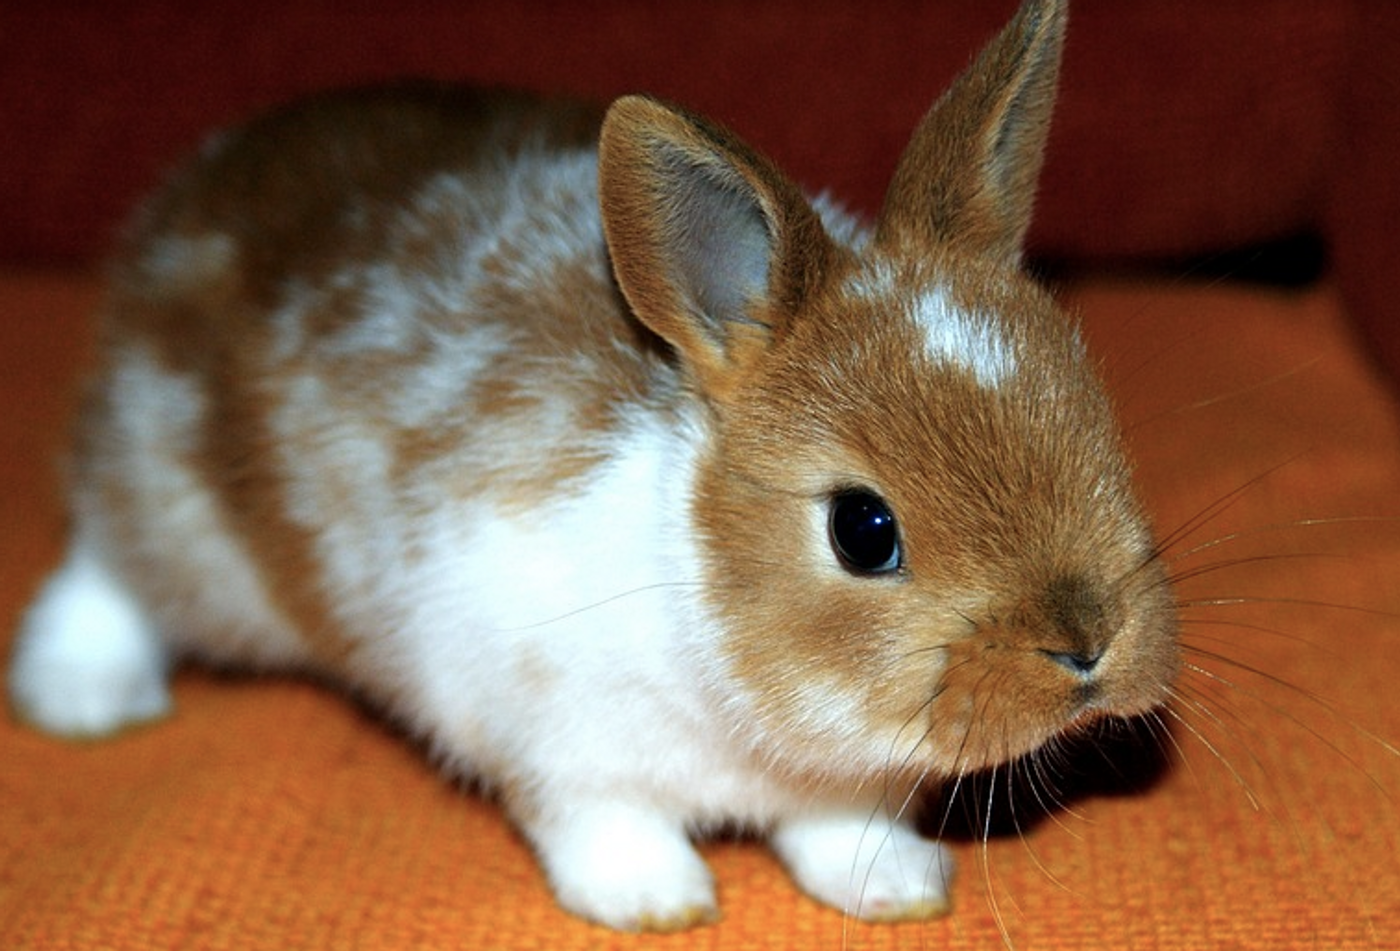 Rabbits were likely domesticated over a period of time, rather than at once in a sudden event. / Image credit: Pixabay